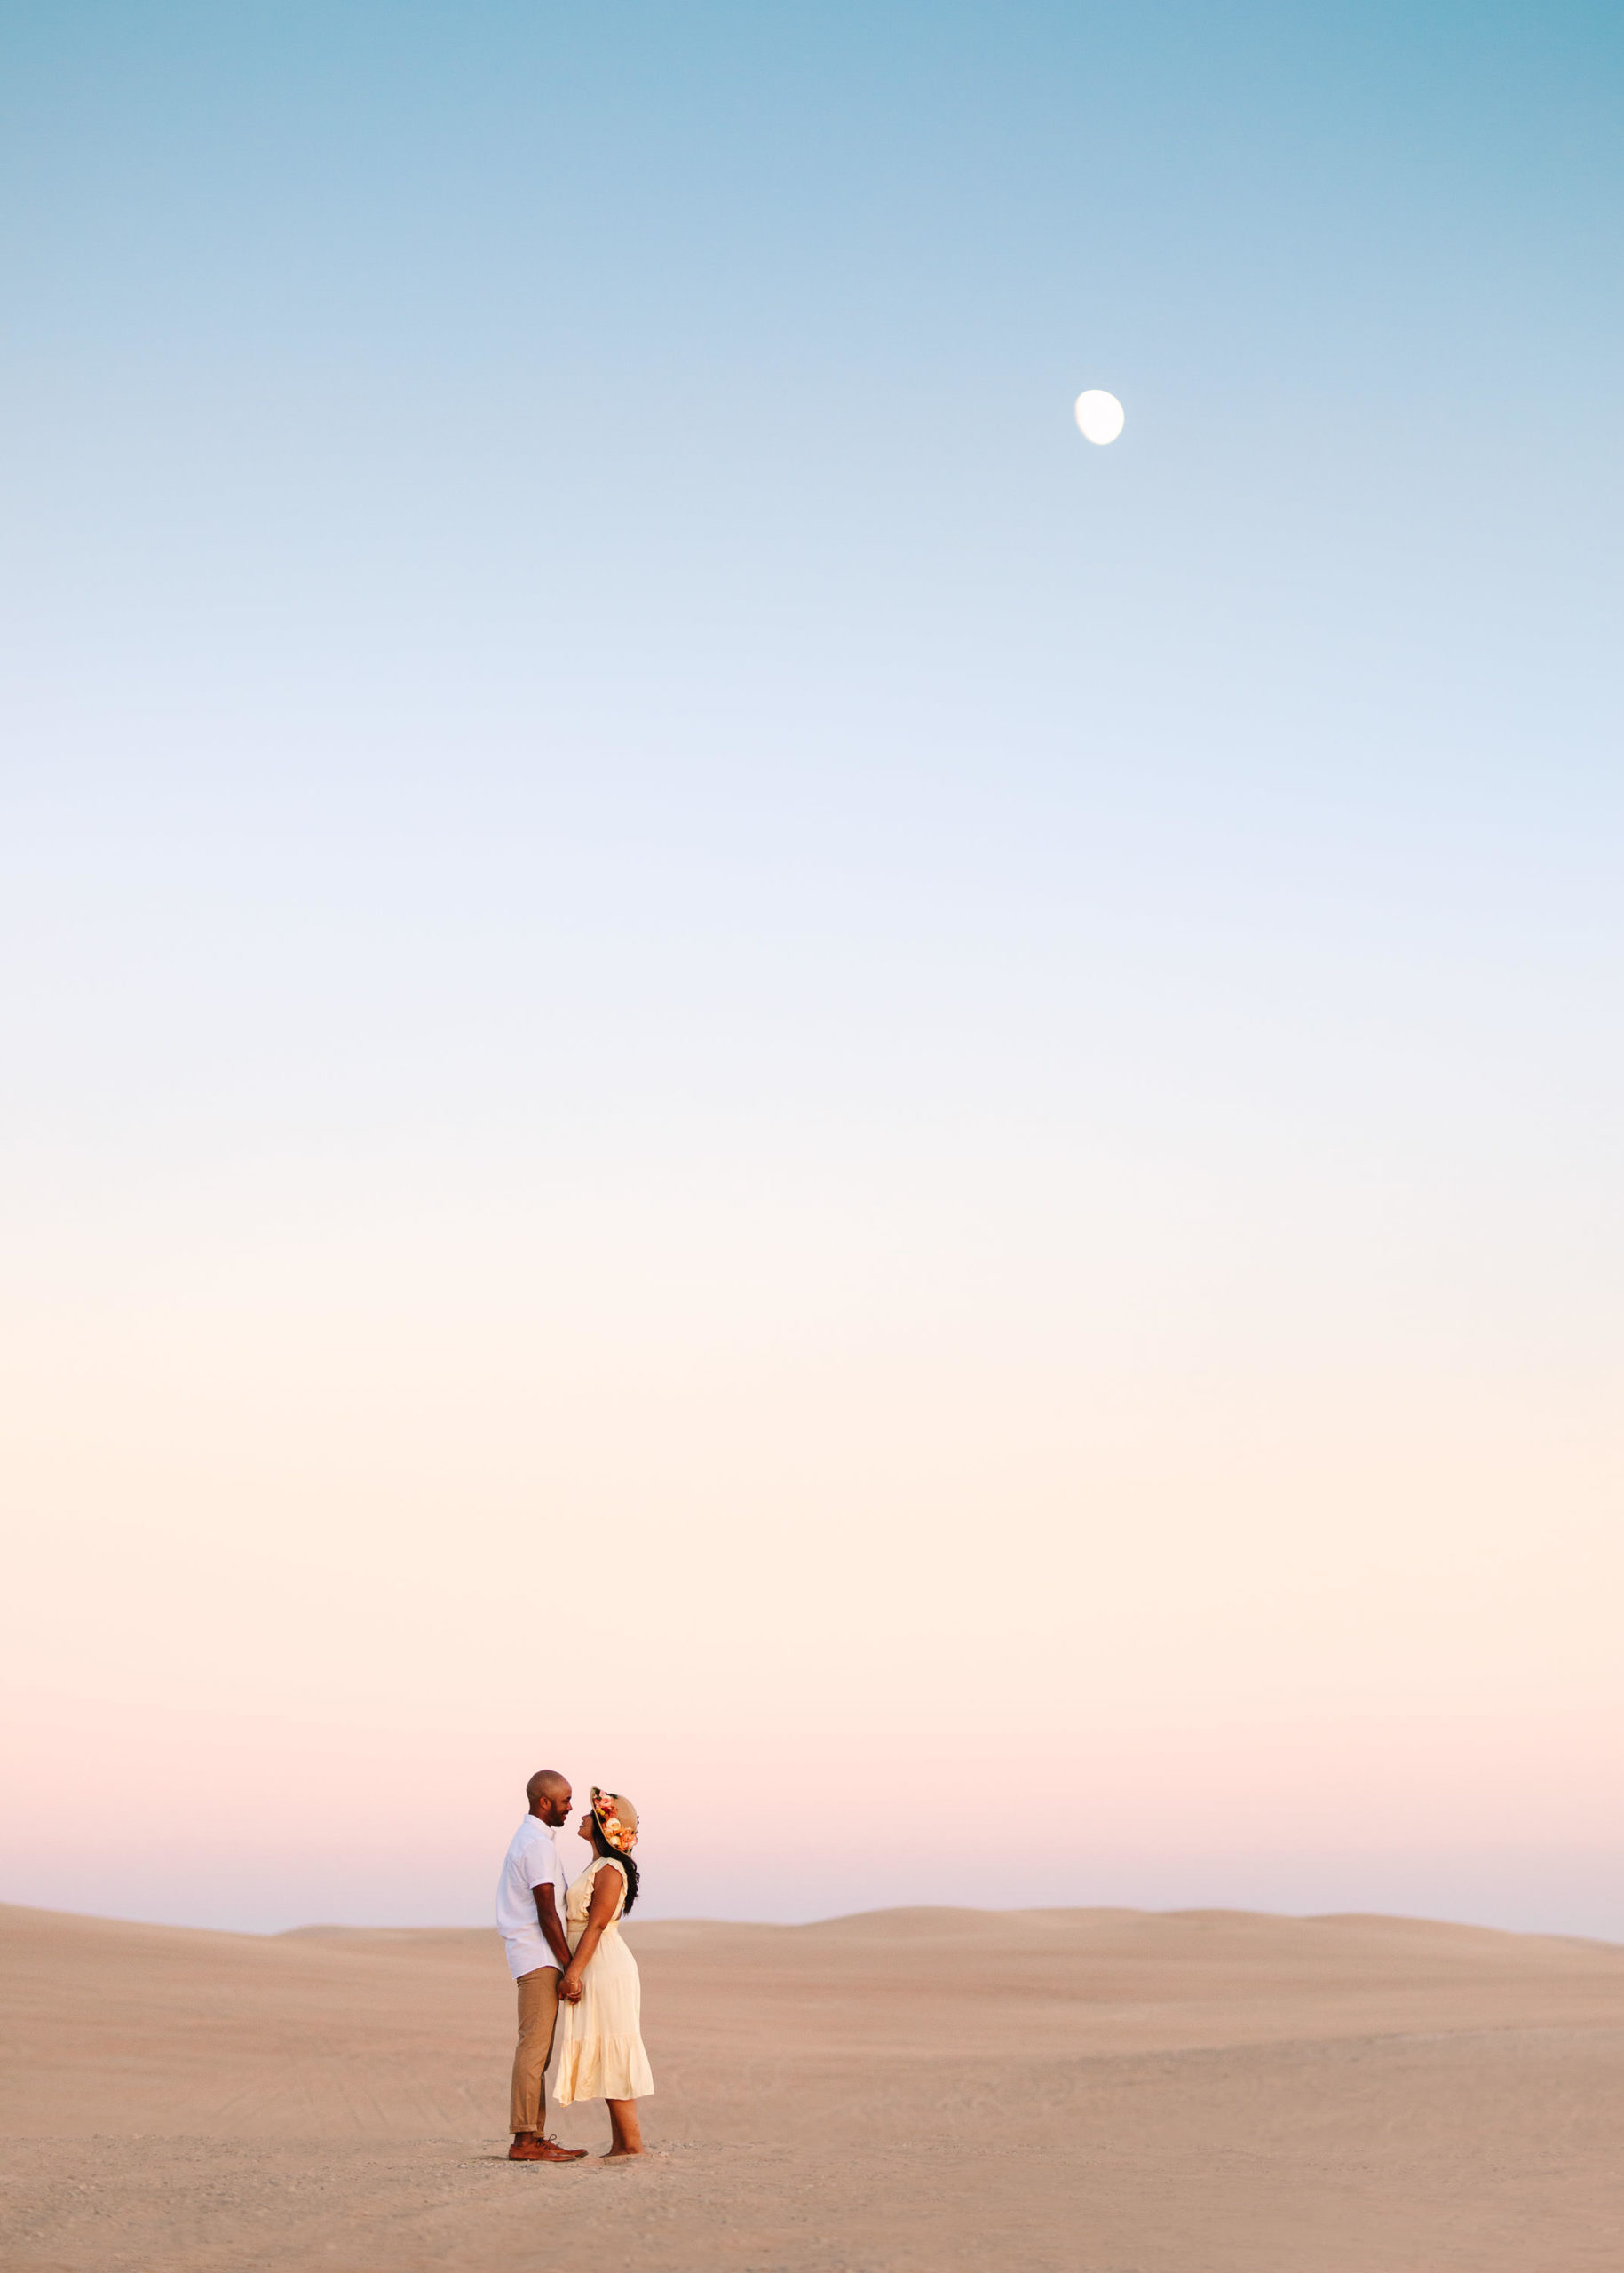 Couple in the sand dunes with the moon out | California Sand Dunes engagement session | Colorful Palm Springs wedding photography | #palmspringsphotographer #sanddunes #engagementsession #southerncalifornia  Source: Mary Costa Photography | Los Angeles